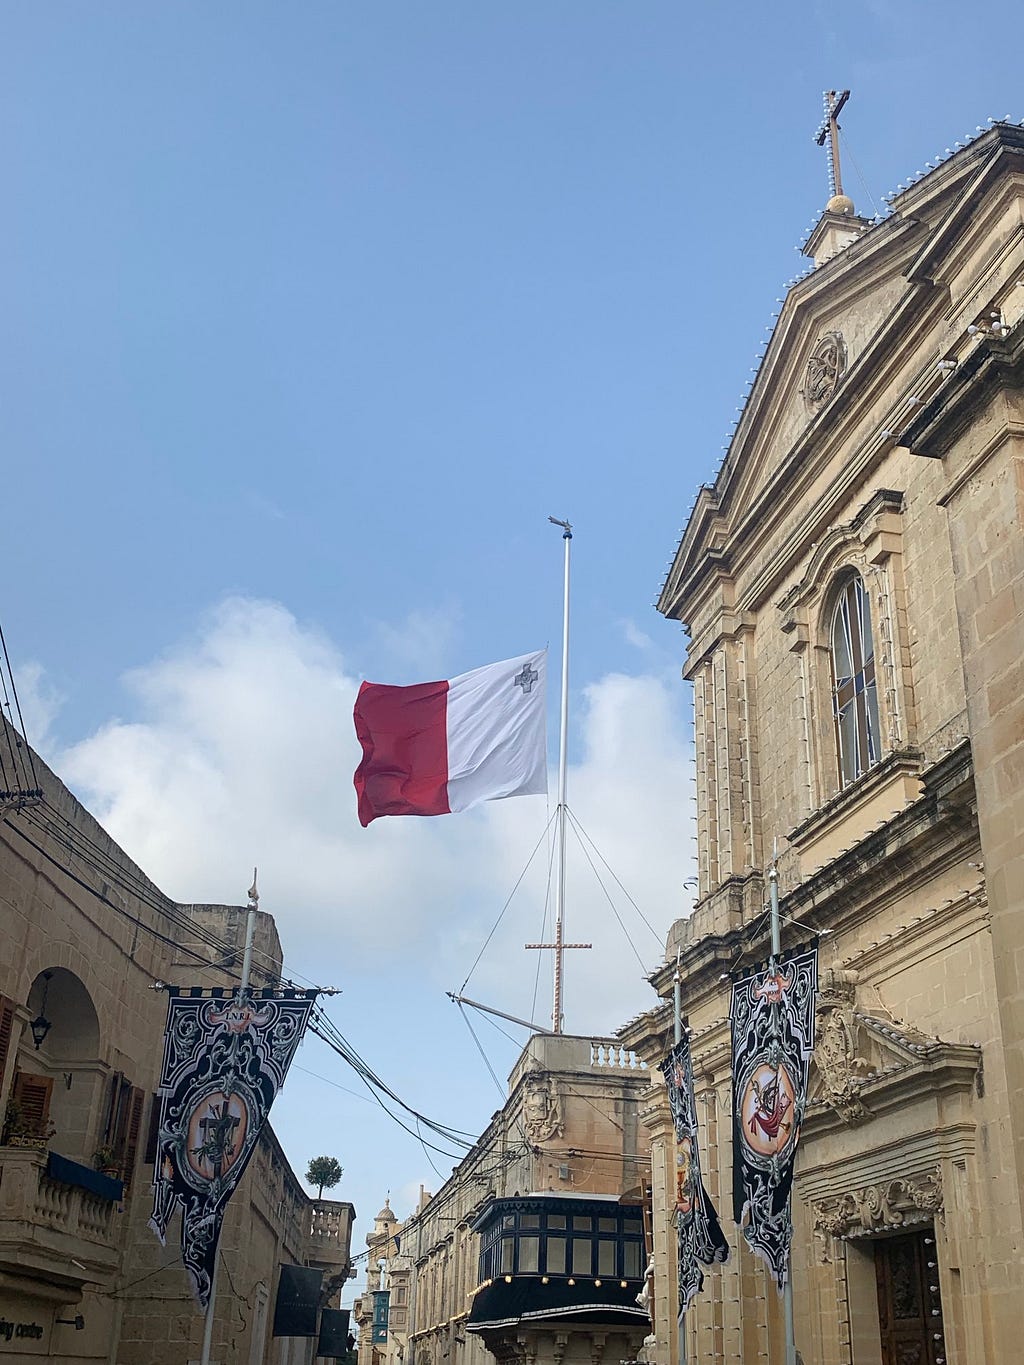 Maltese flag (red and white horizontal stripe with st george cross) flys backwards near a church in Mdina